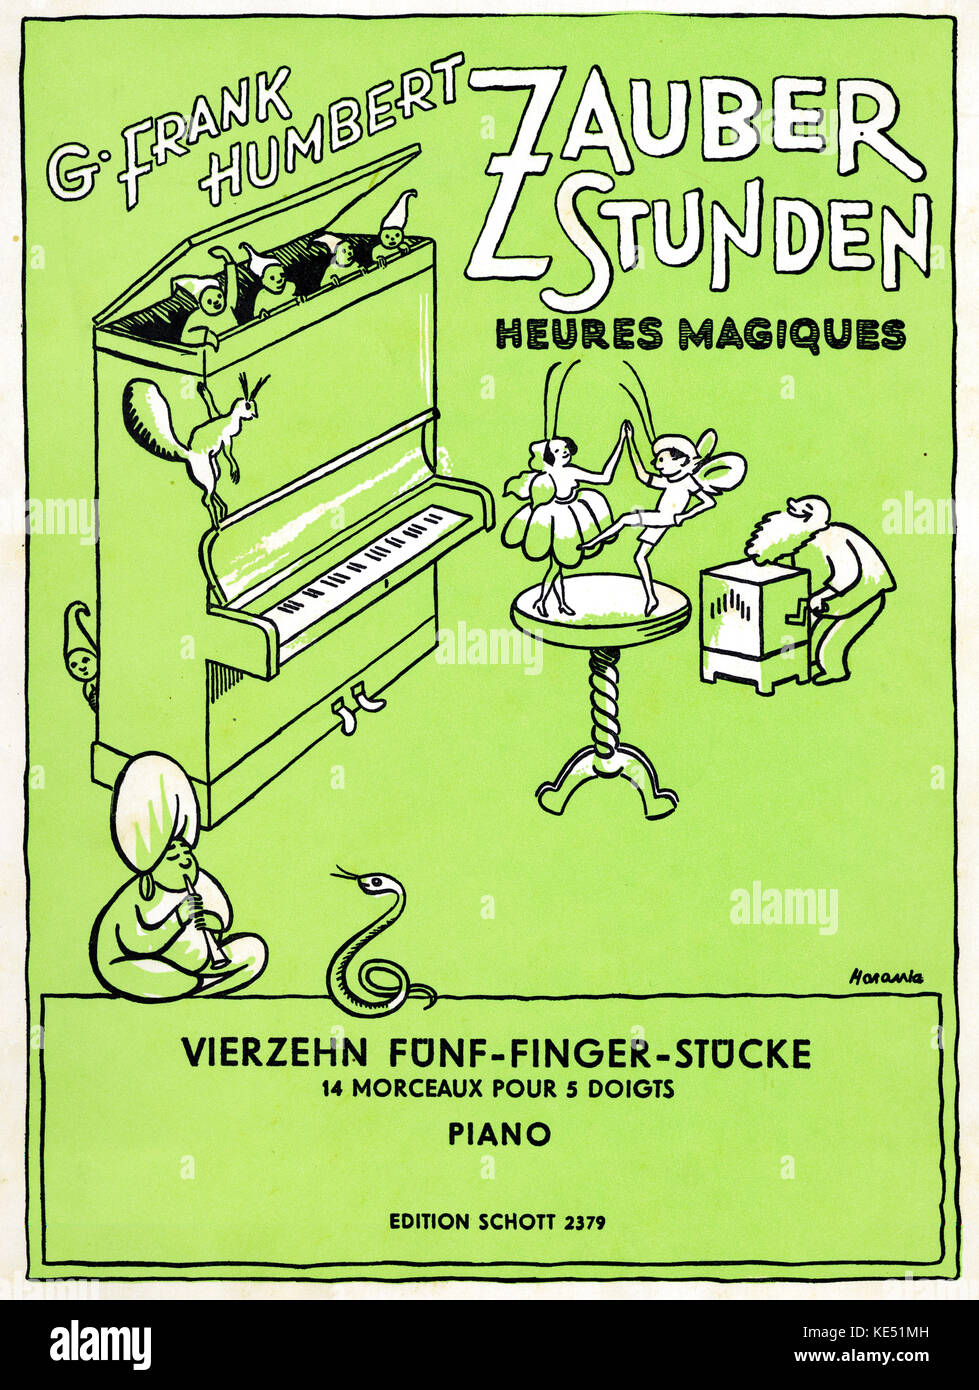 'Zauberstuden' (Heures Magiques / Magic Hours) - score cover of the 14 five-finger pieces for piano, music by German composer Georges Frank Humbert. Published: Mainz, B. Schott's Söhne, 1934. Stock Photo